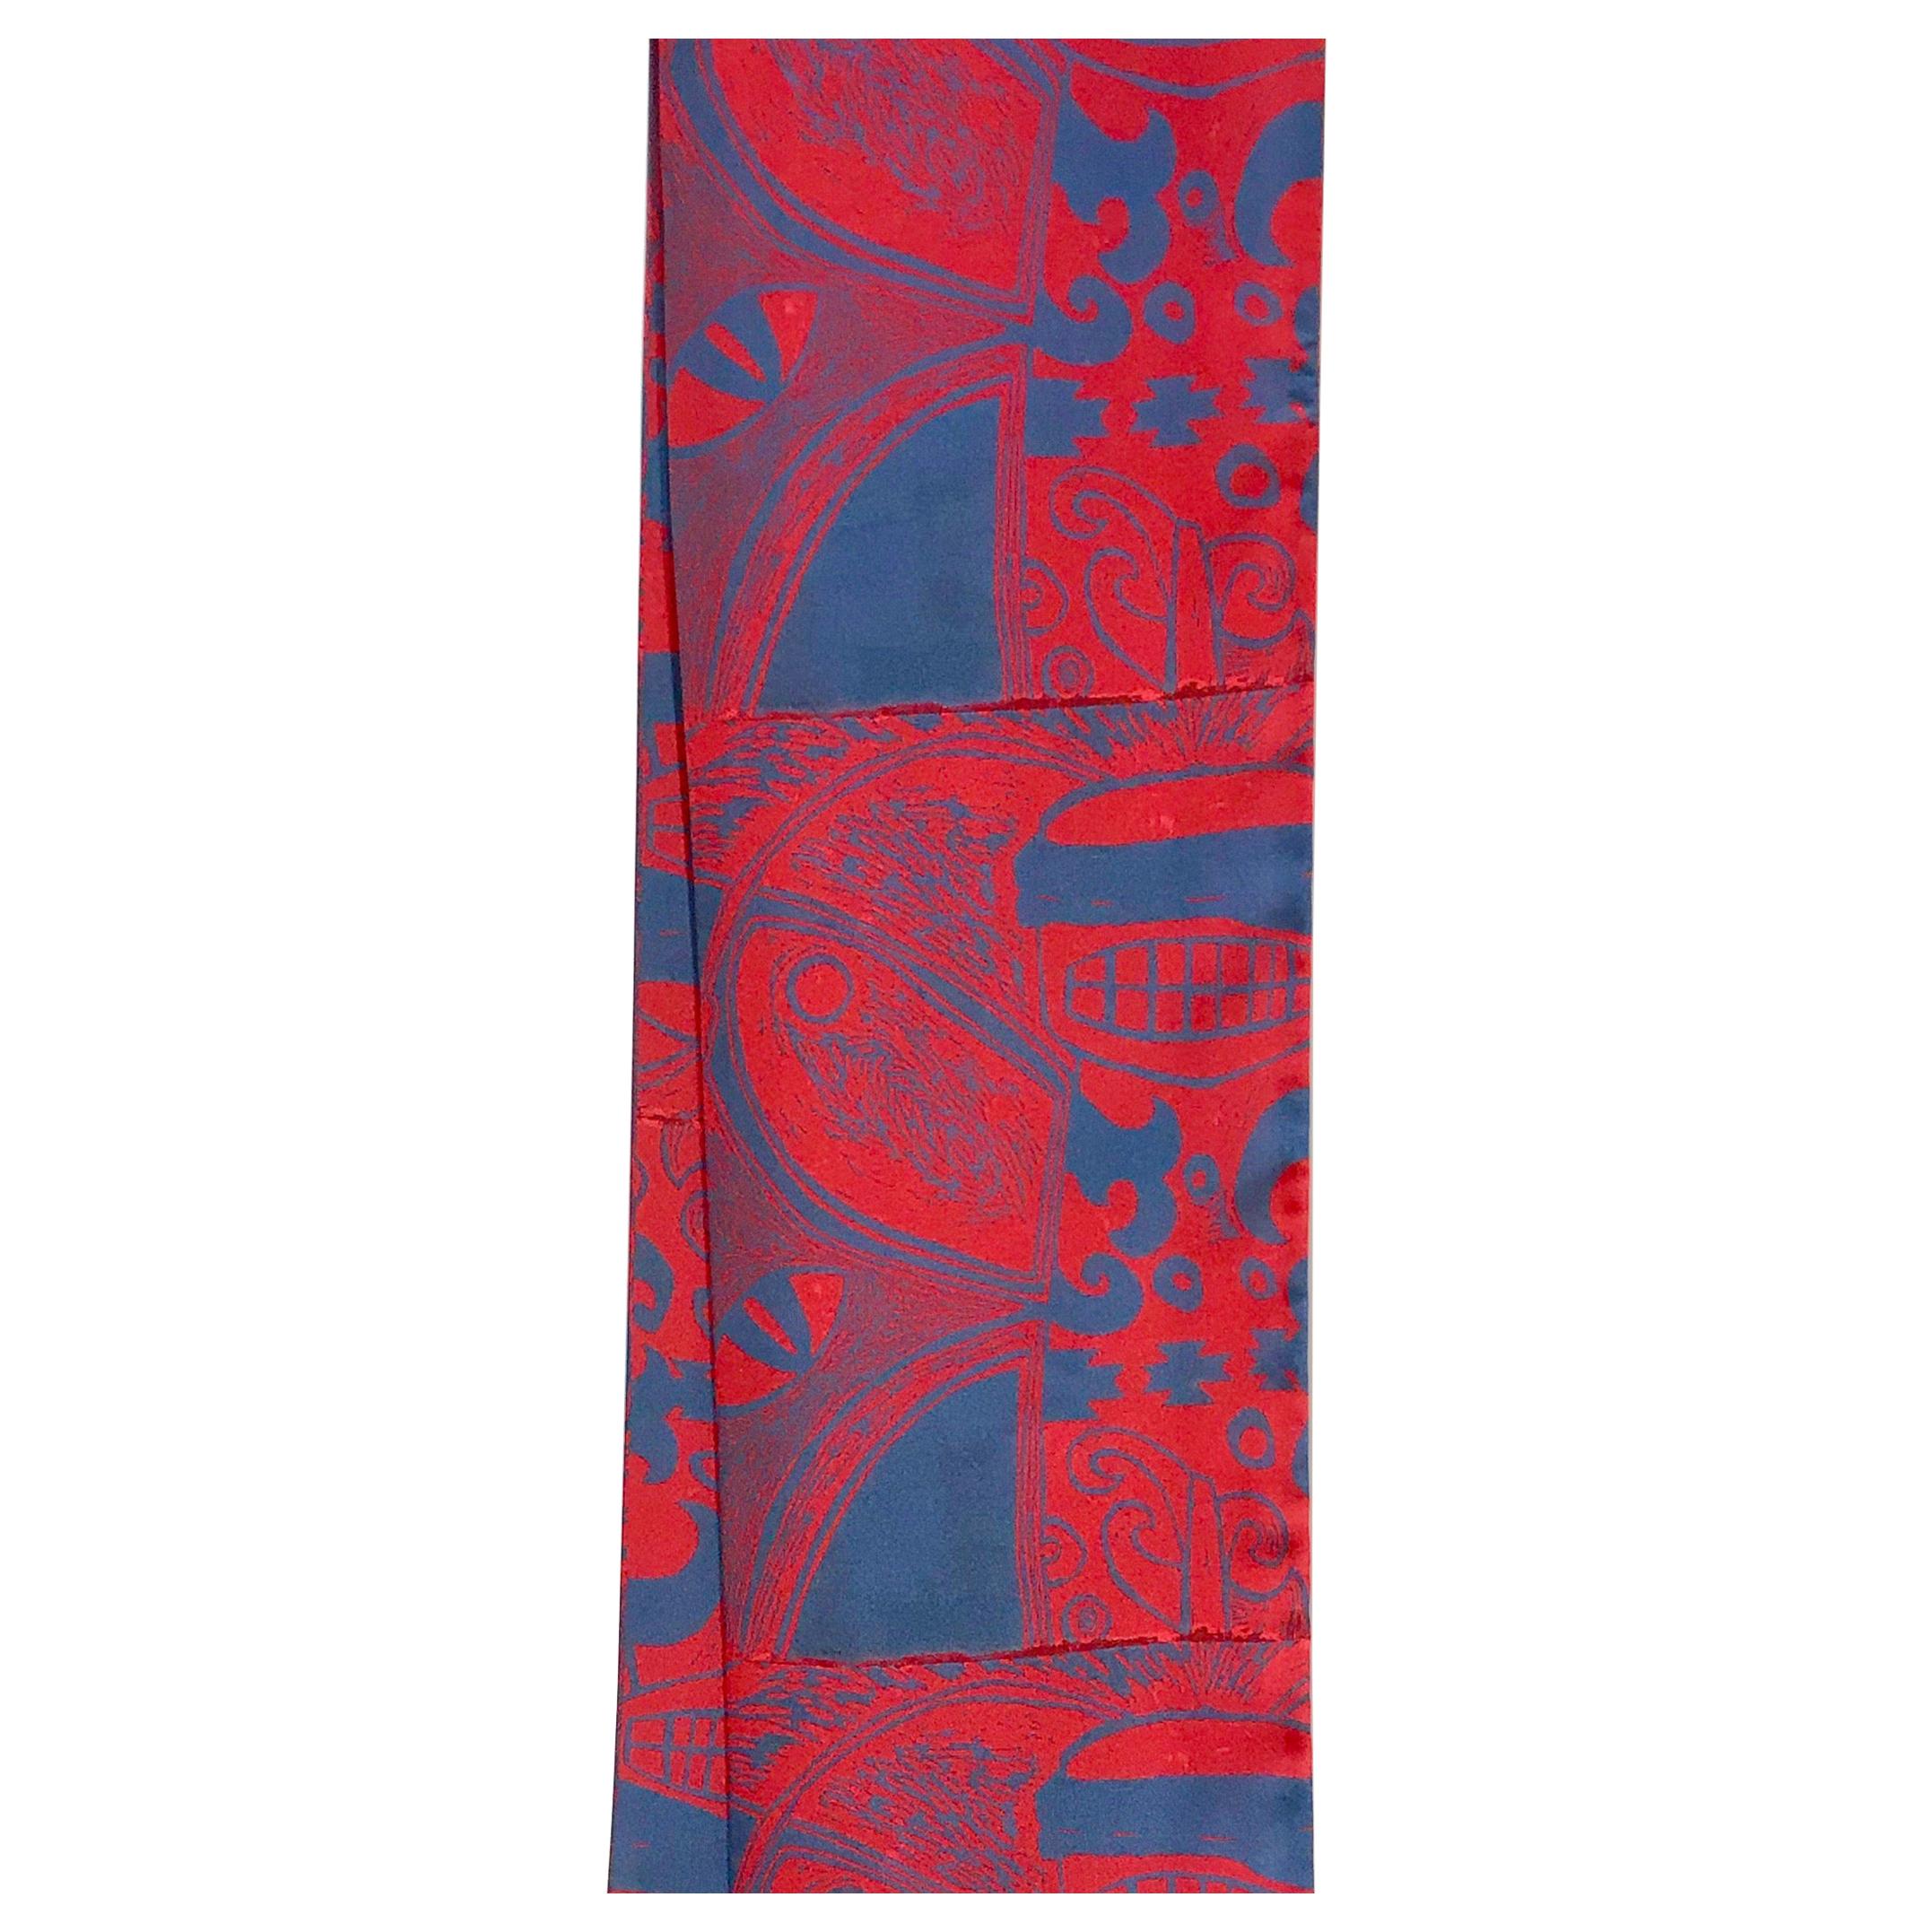 He Sees, poly crepe de Chine scarf, bee, red, blue, artist design, Native American